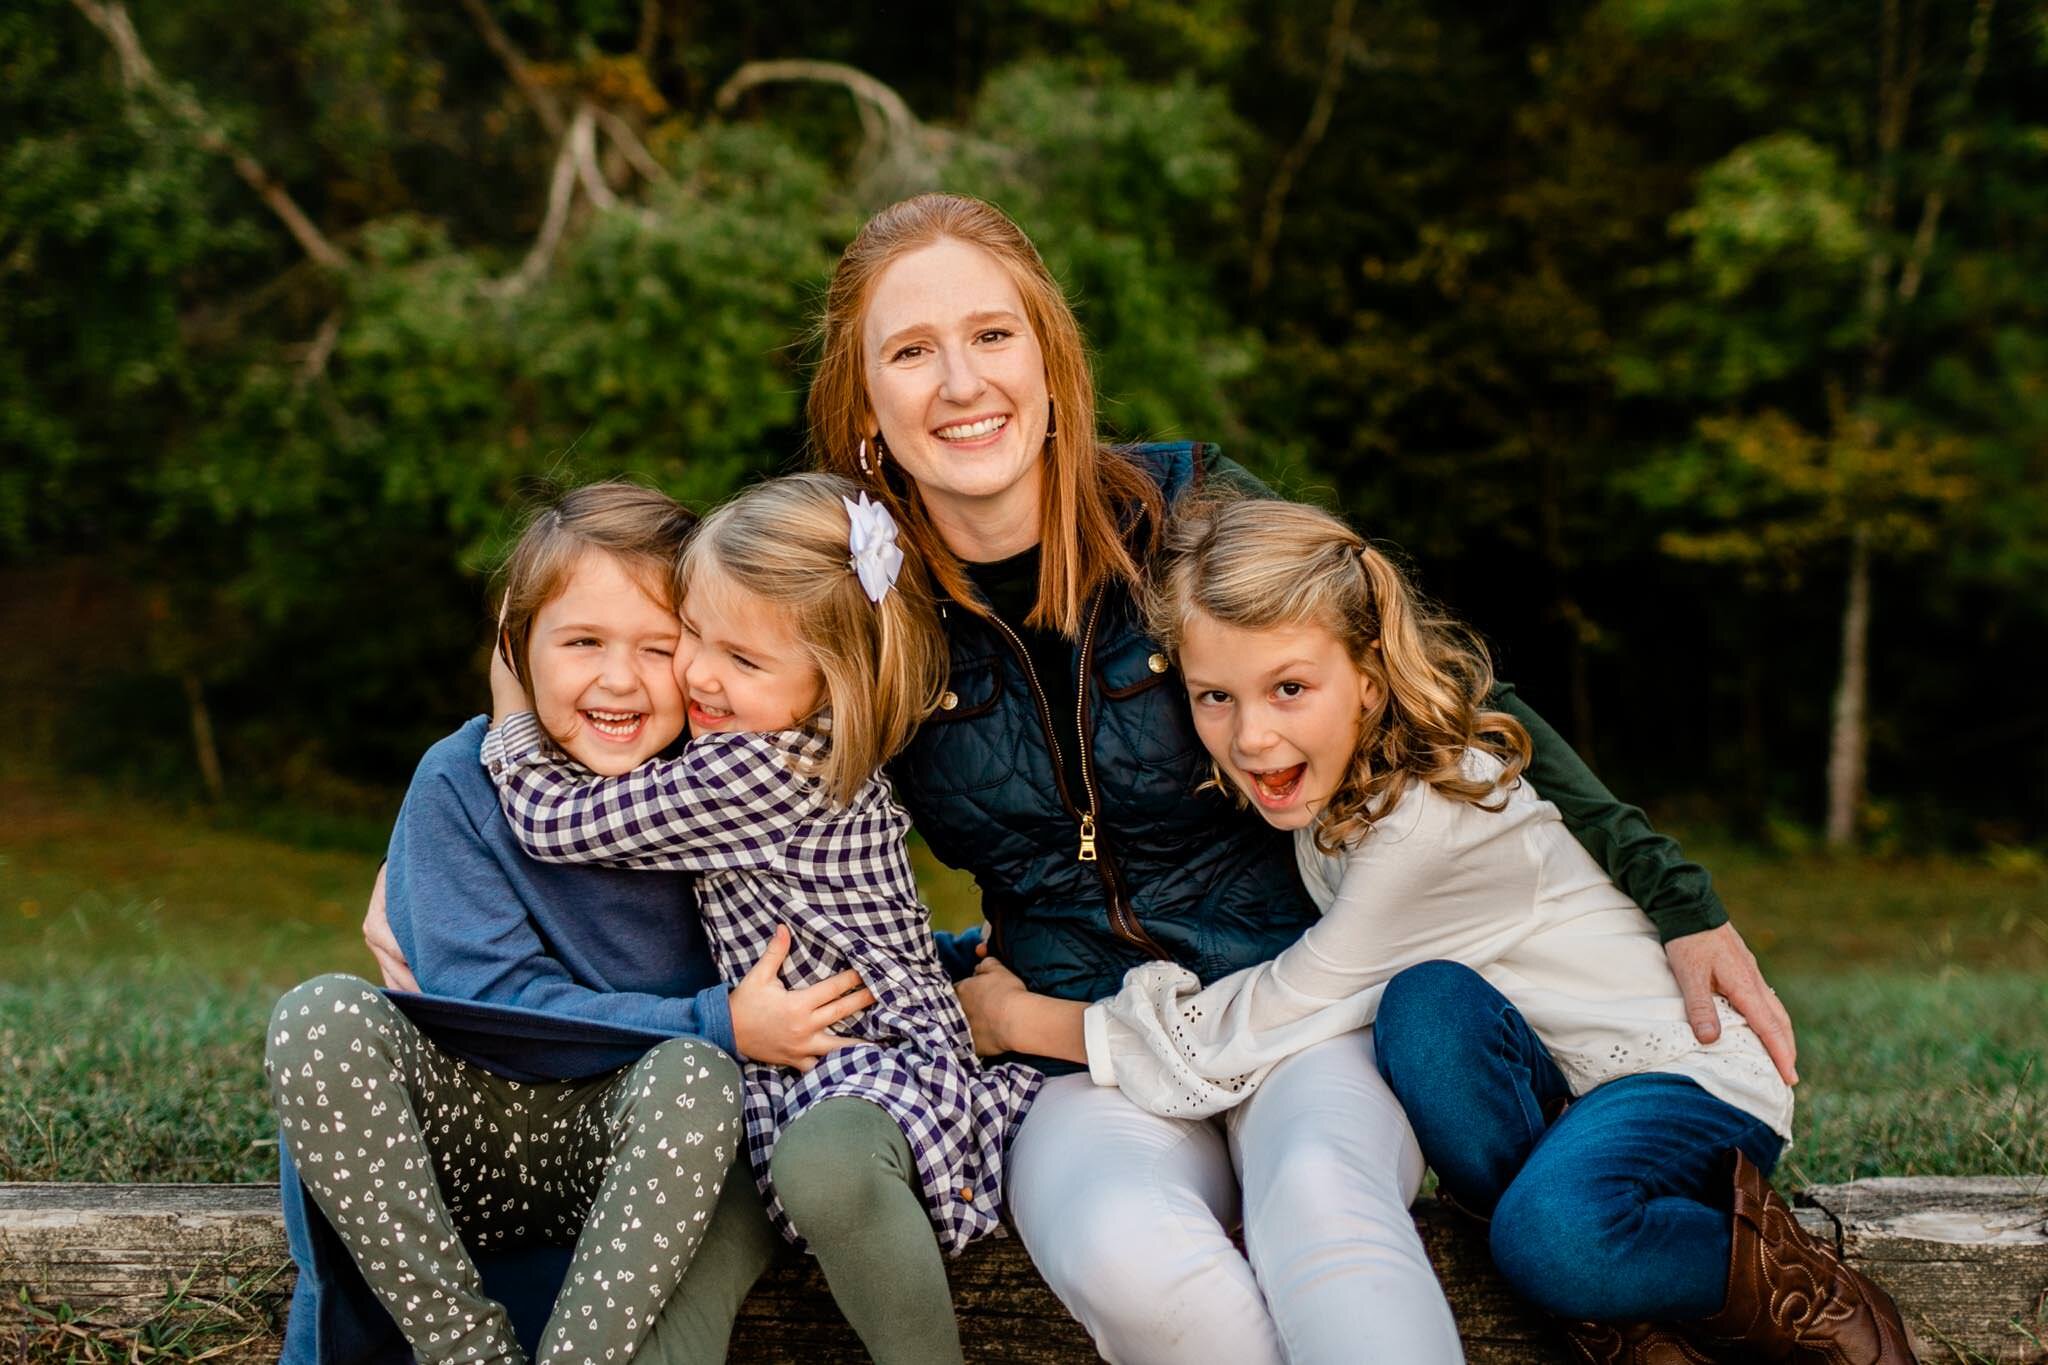 Raleigh Family Photographer | Umstead Park | By G. Lin Photography | Mother hugging daughters